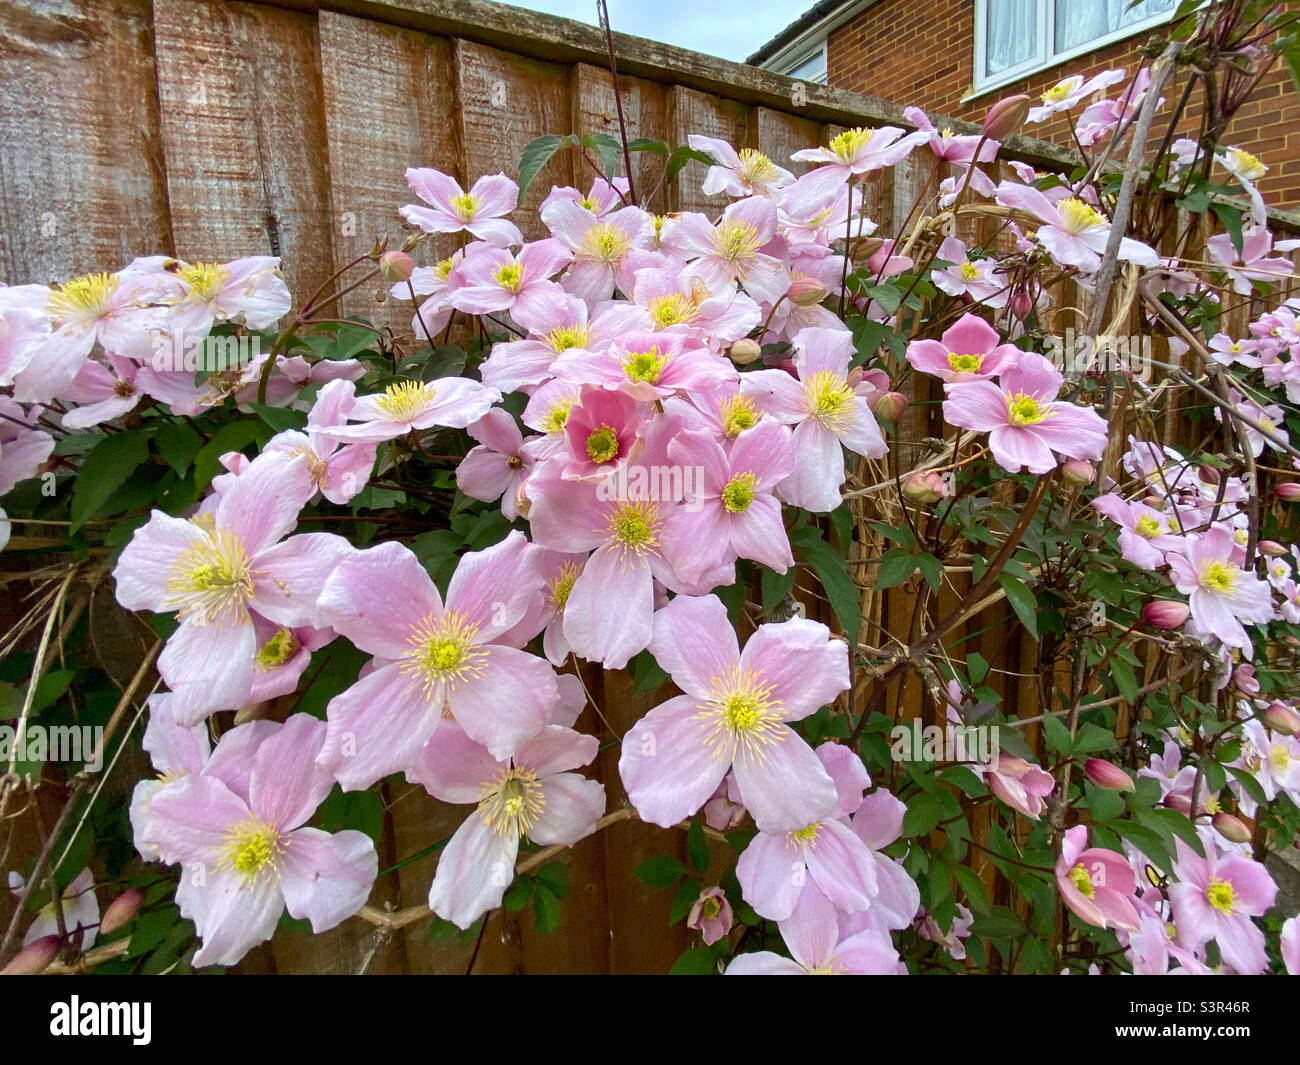 Clematis Montana growing up a garden fence, in full bloom with many pink flowers. Stock Photo